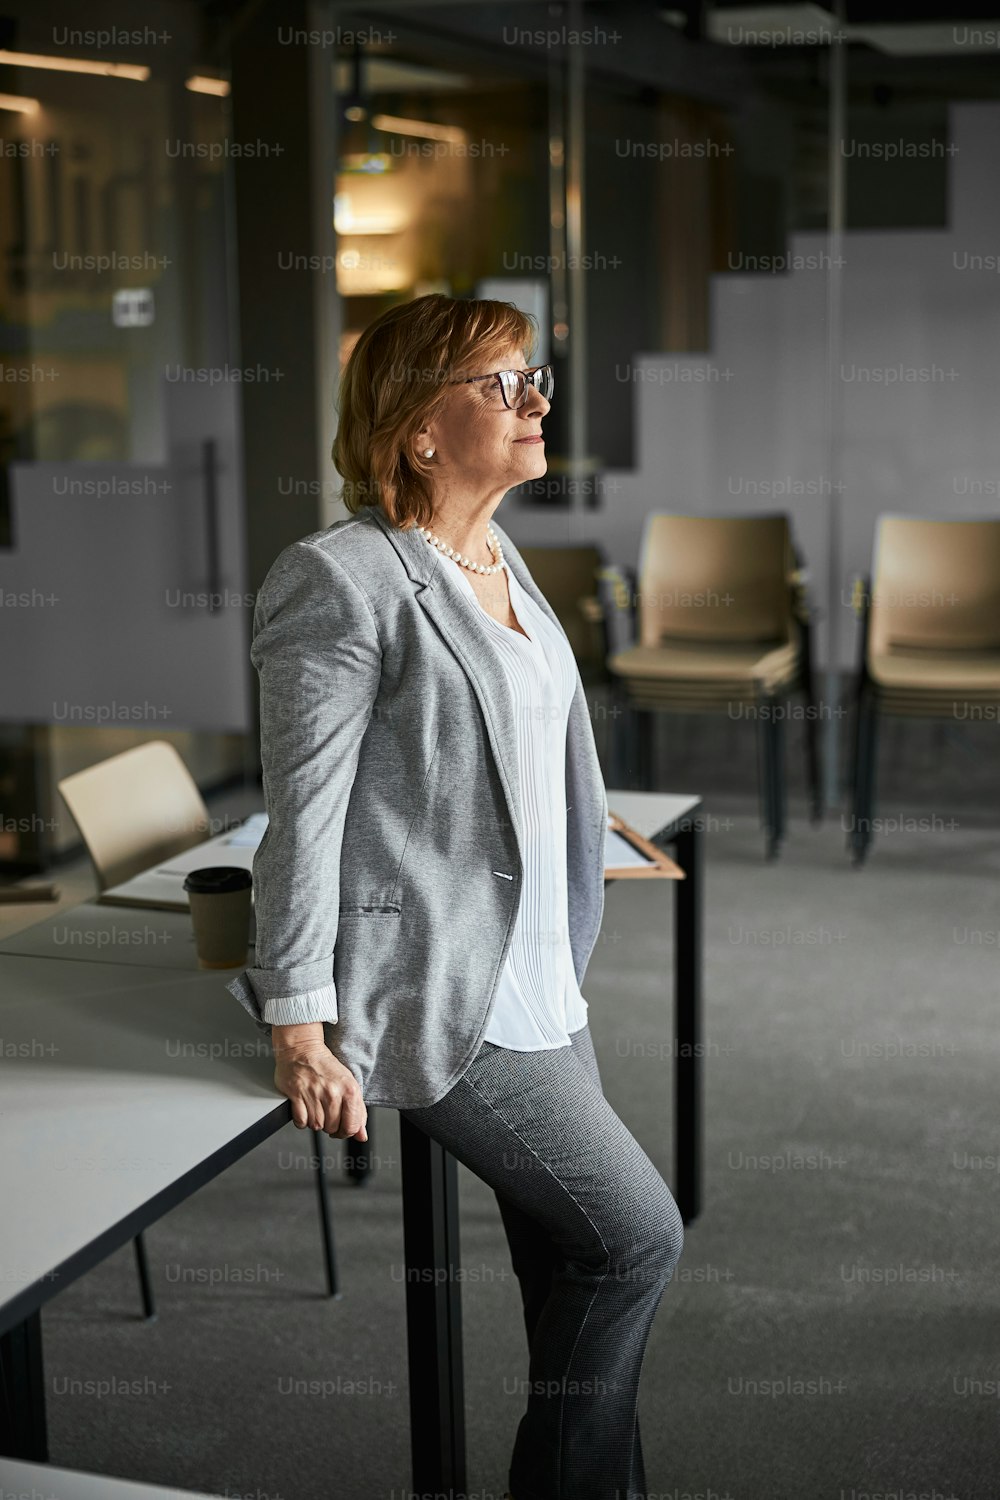 Business lady in stylish glasses and official clothing resting against a grey desk while looking ahead